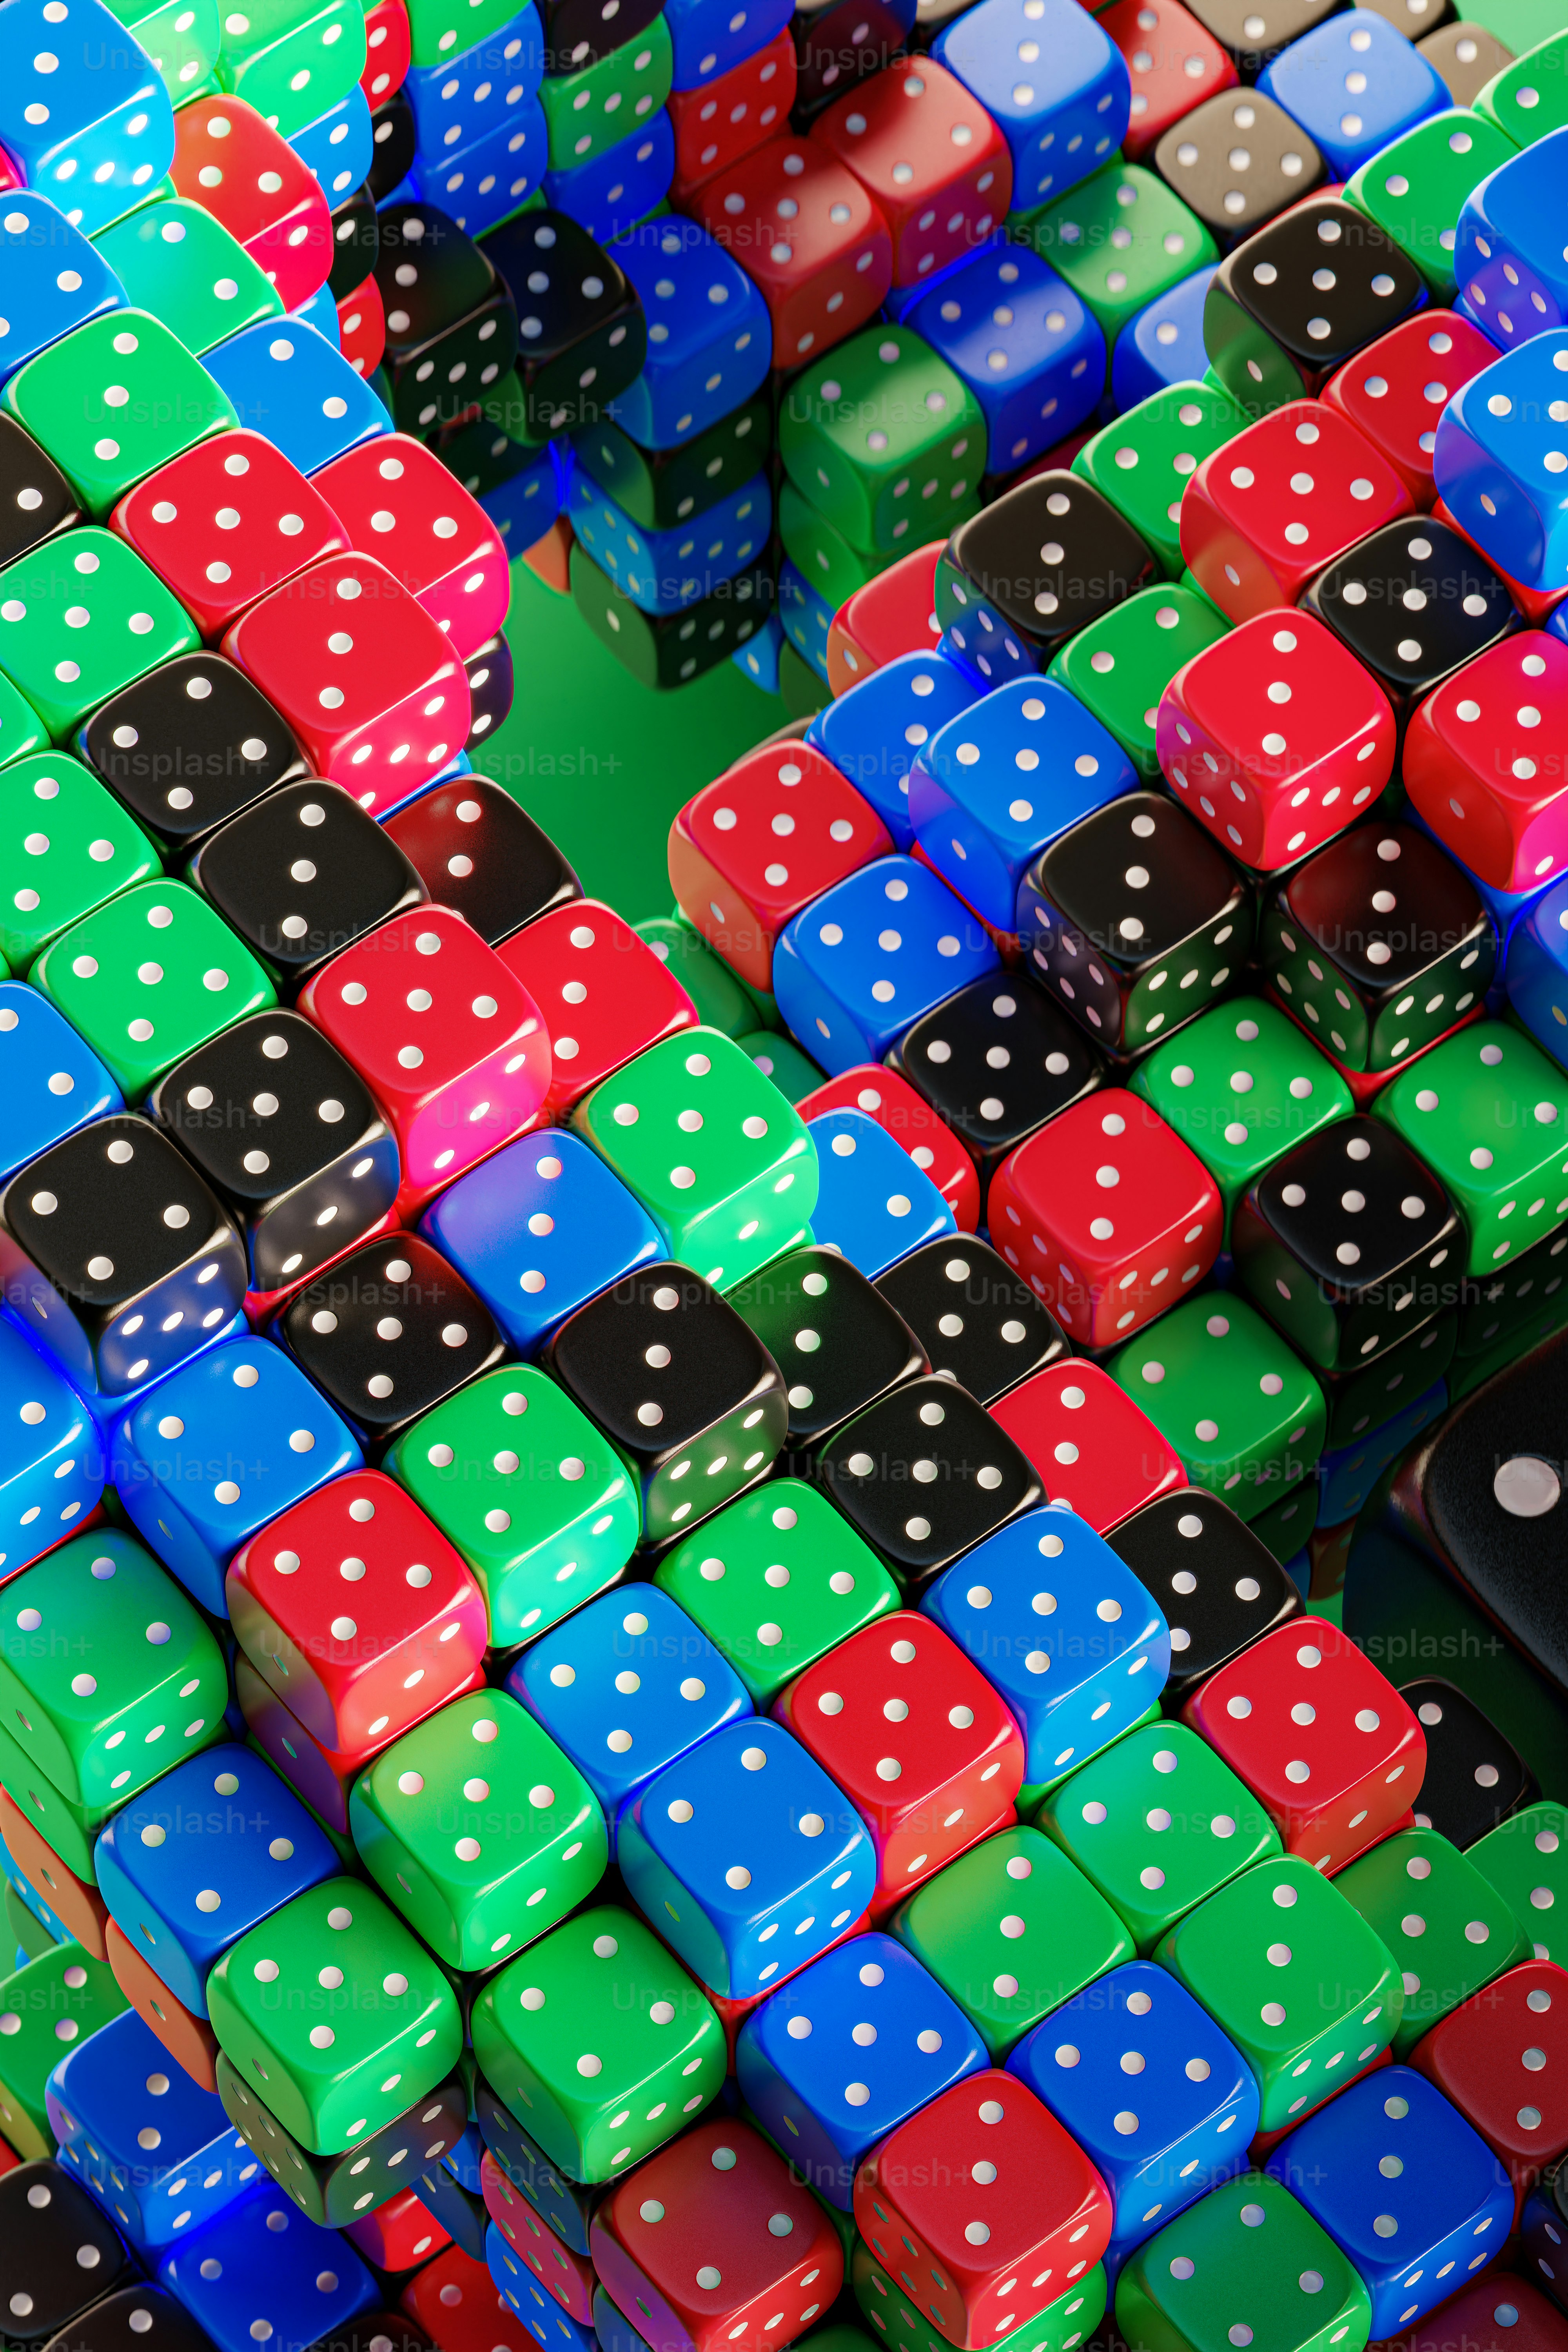 3D render of gambling dice in a colorful poker color scheme.